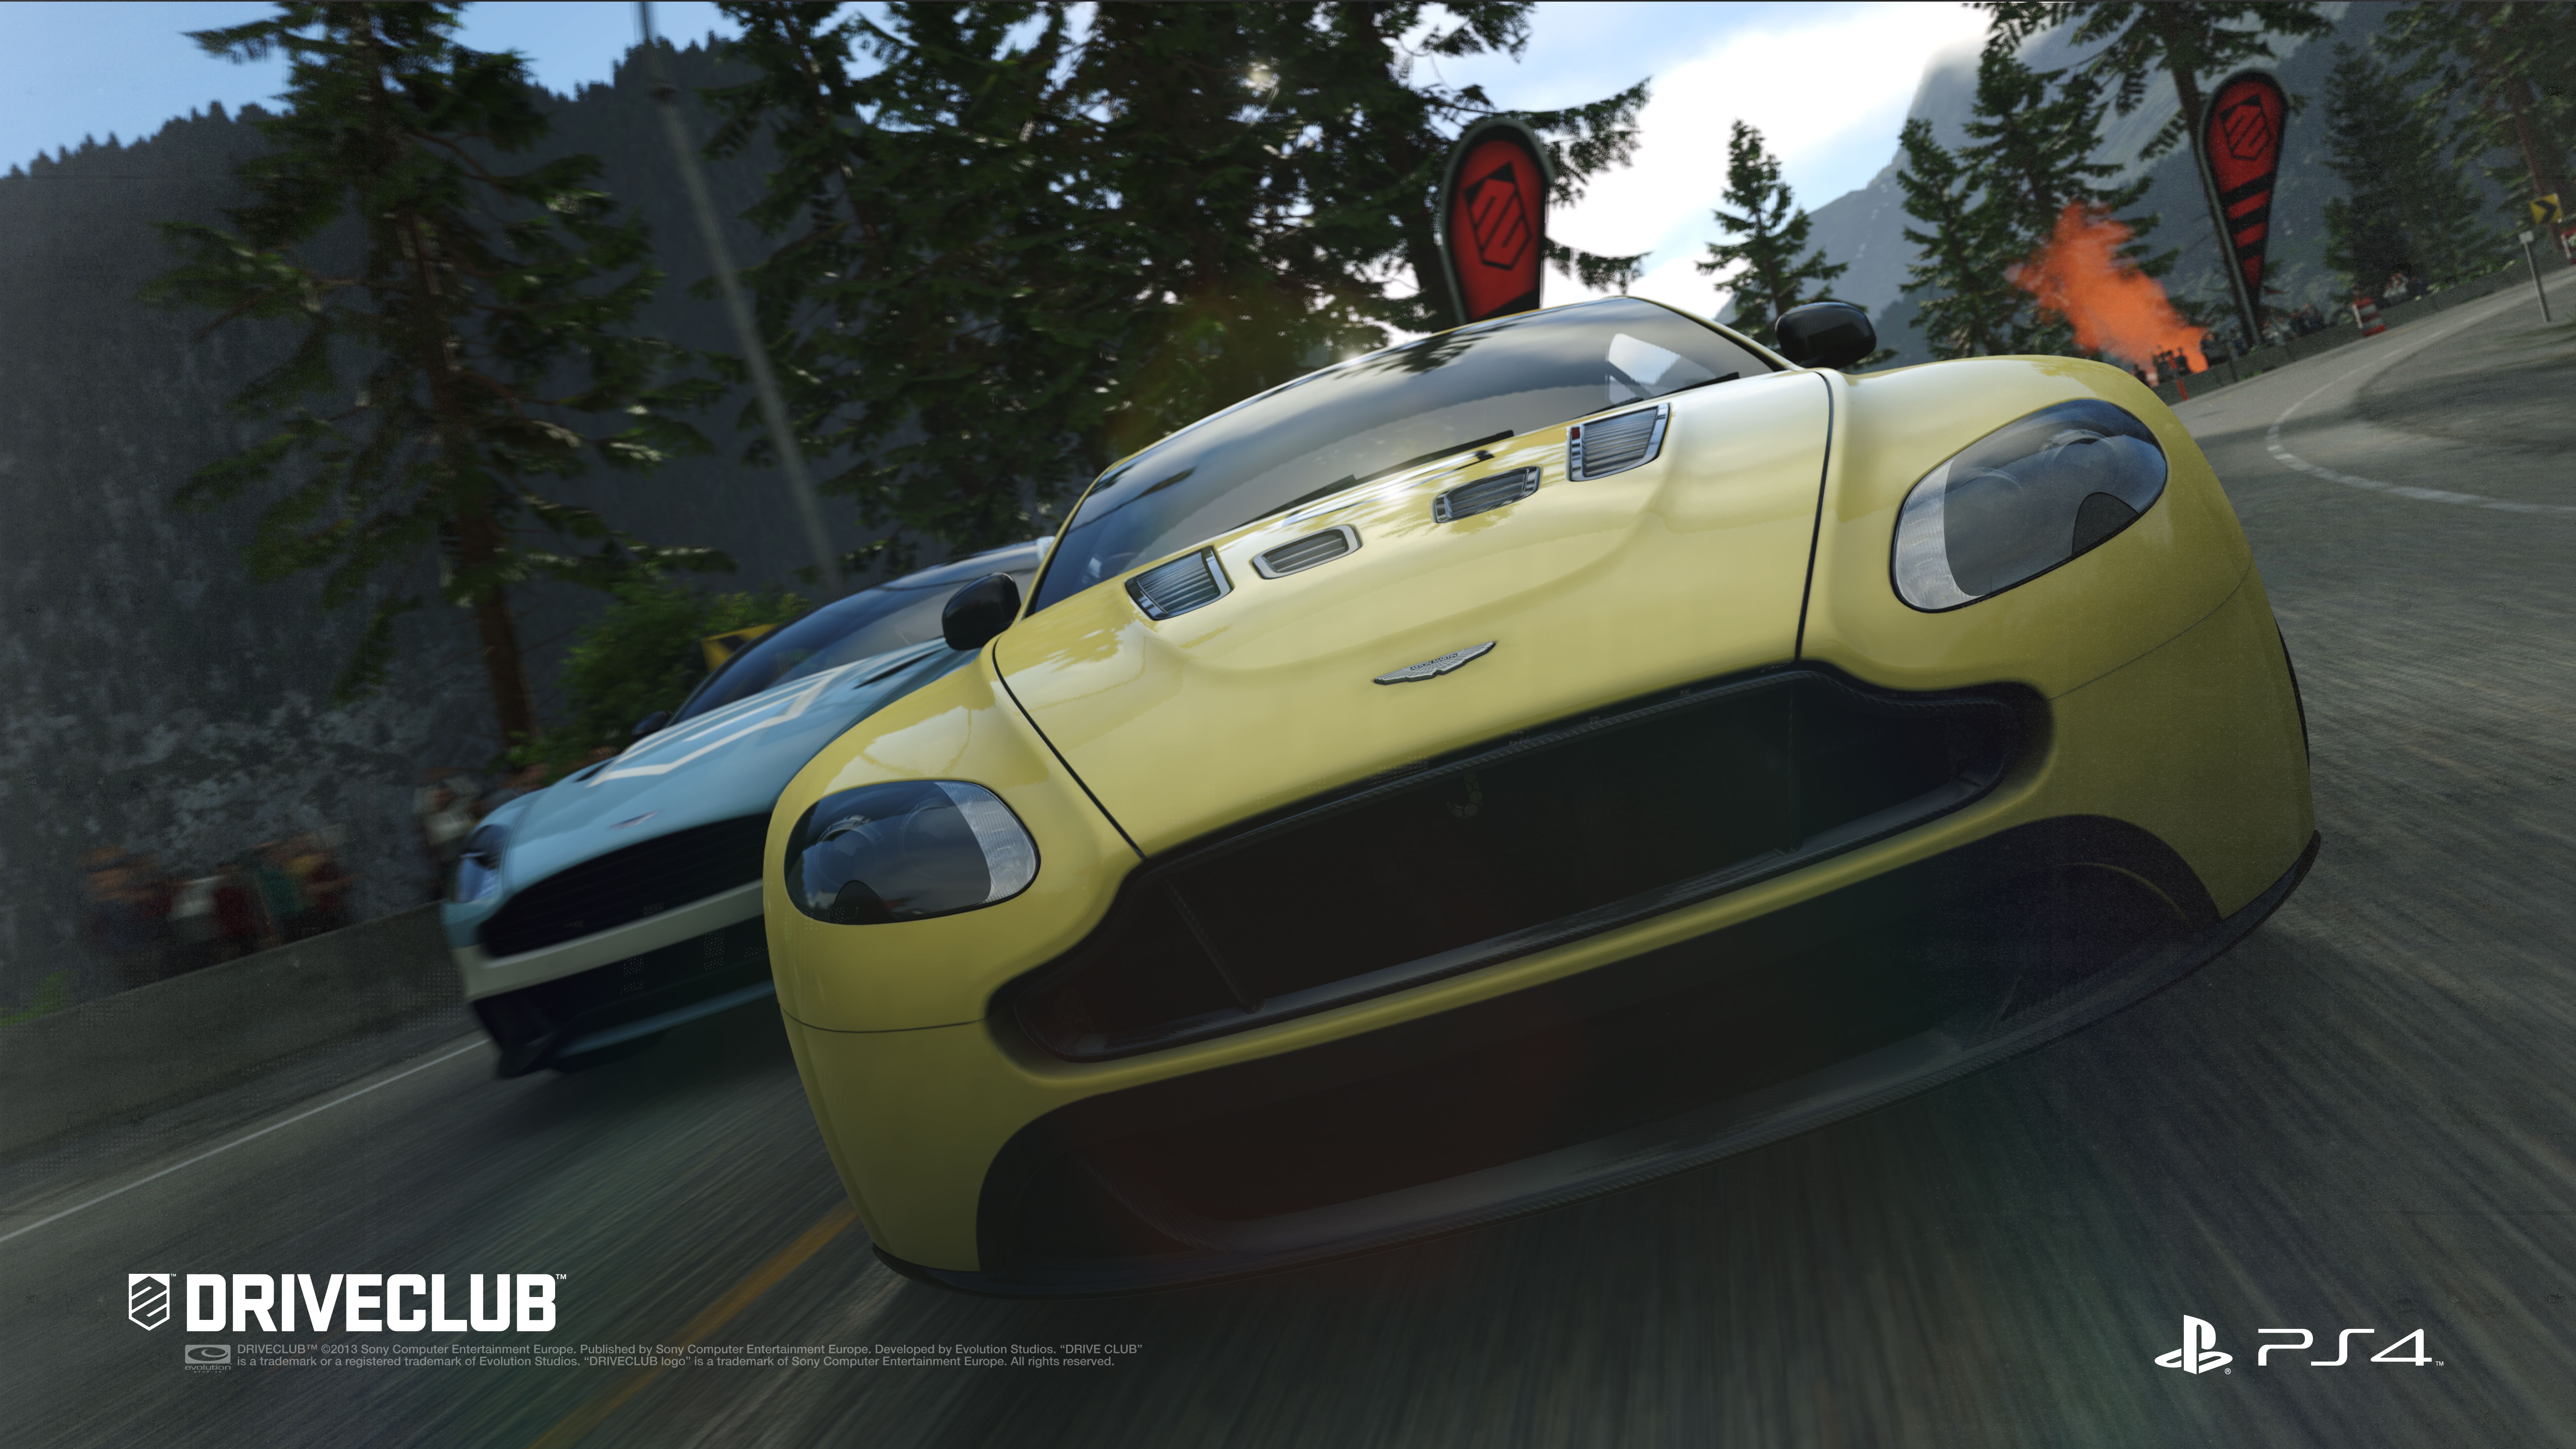 driveclub review image 2